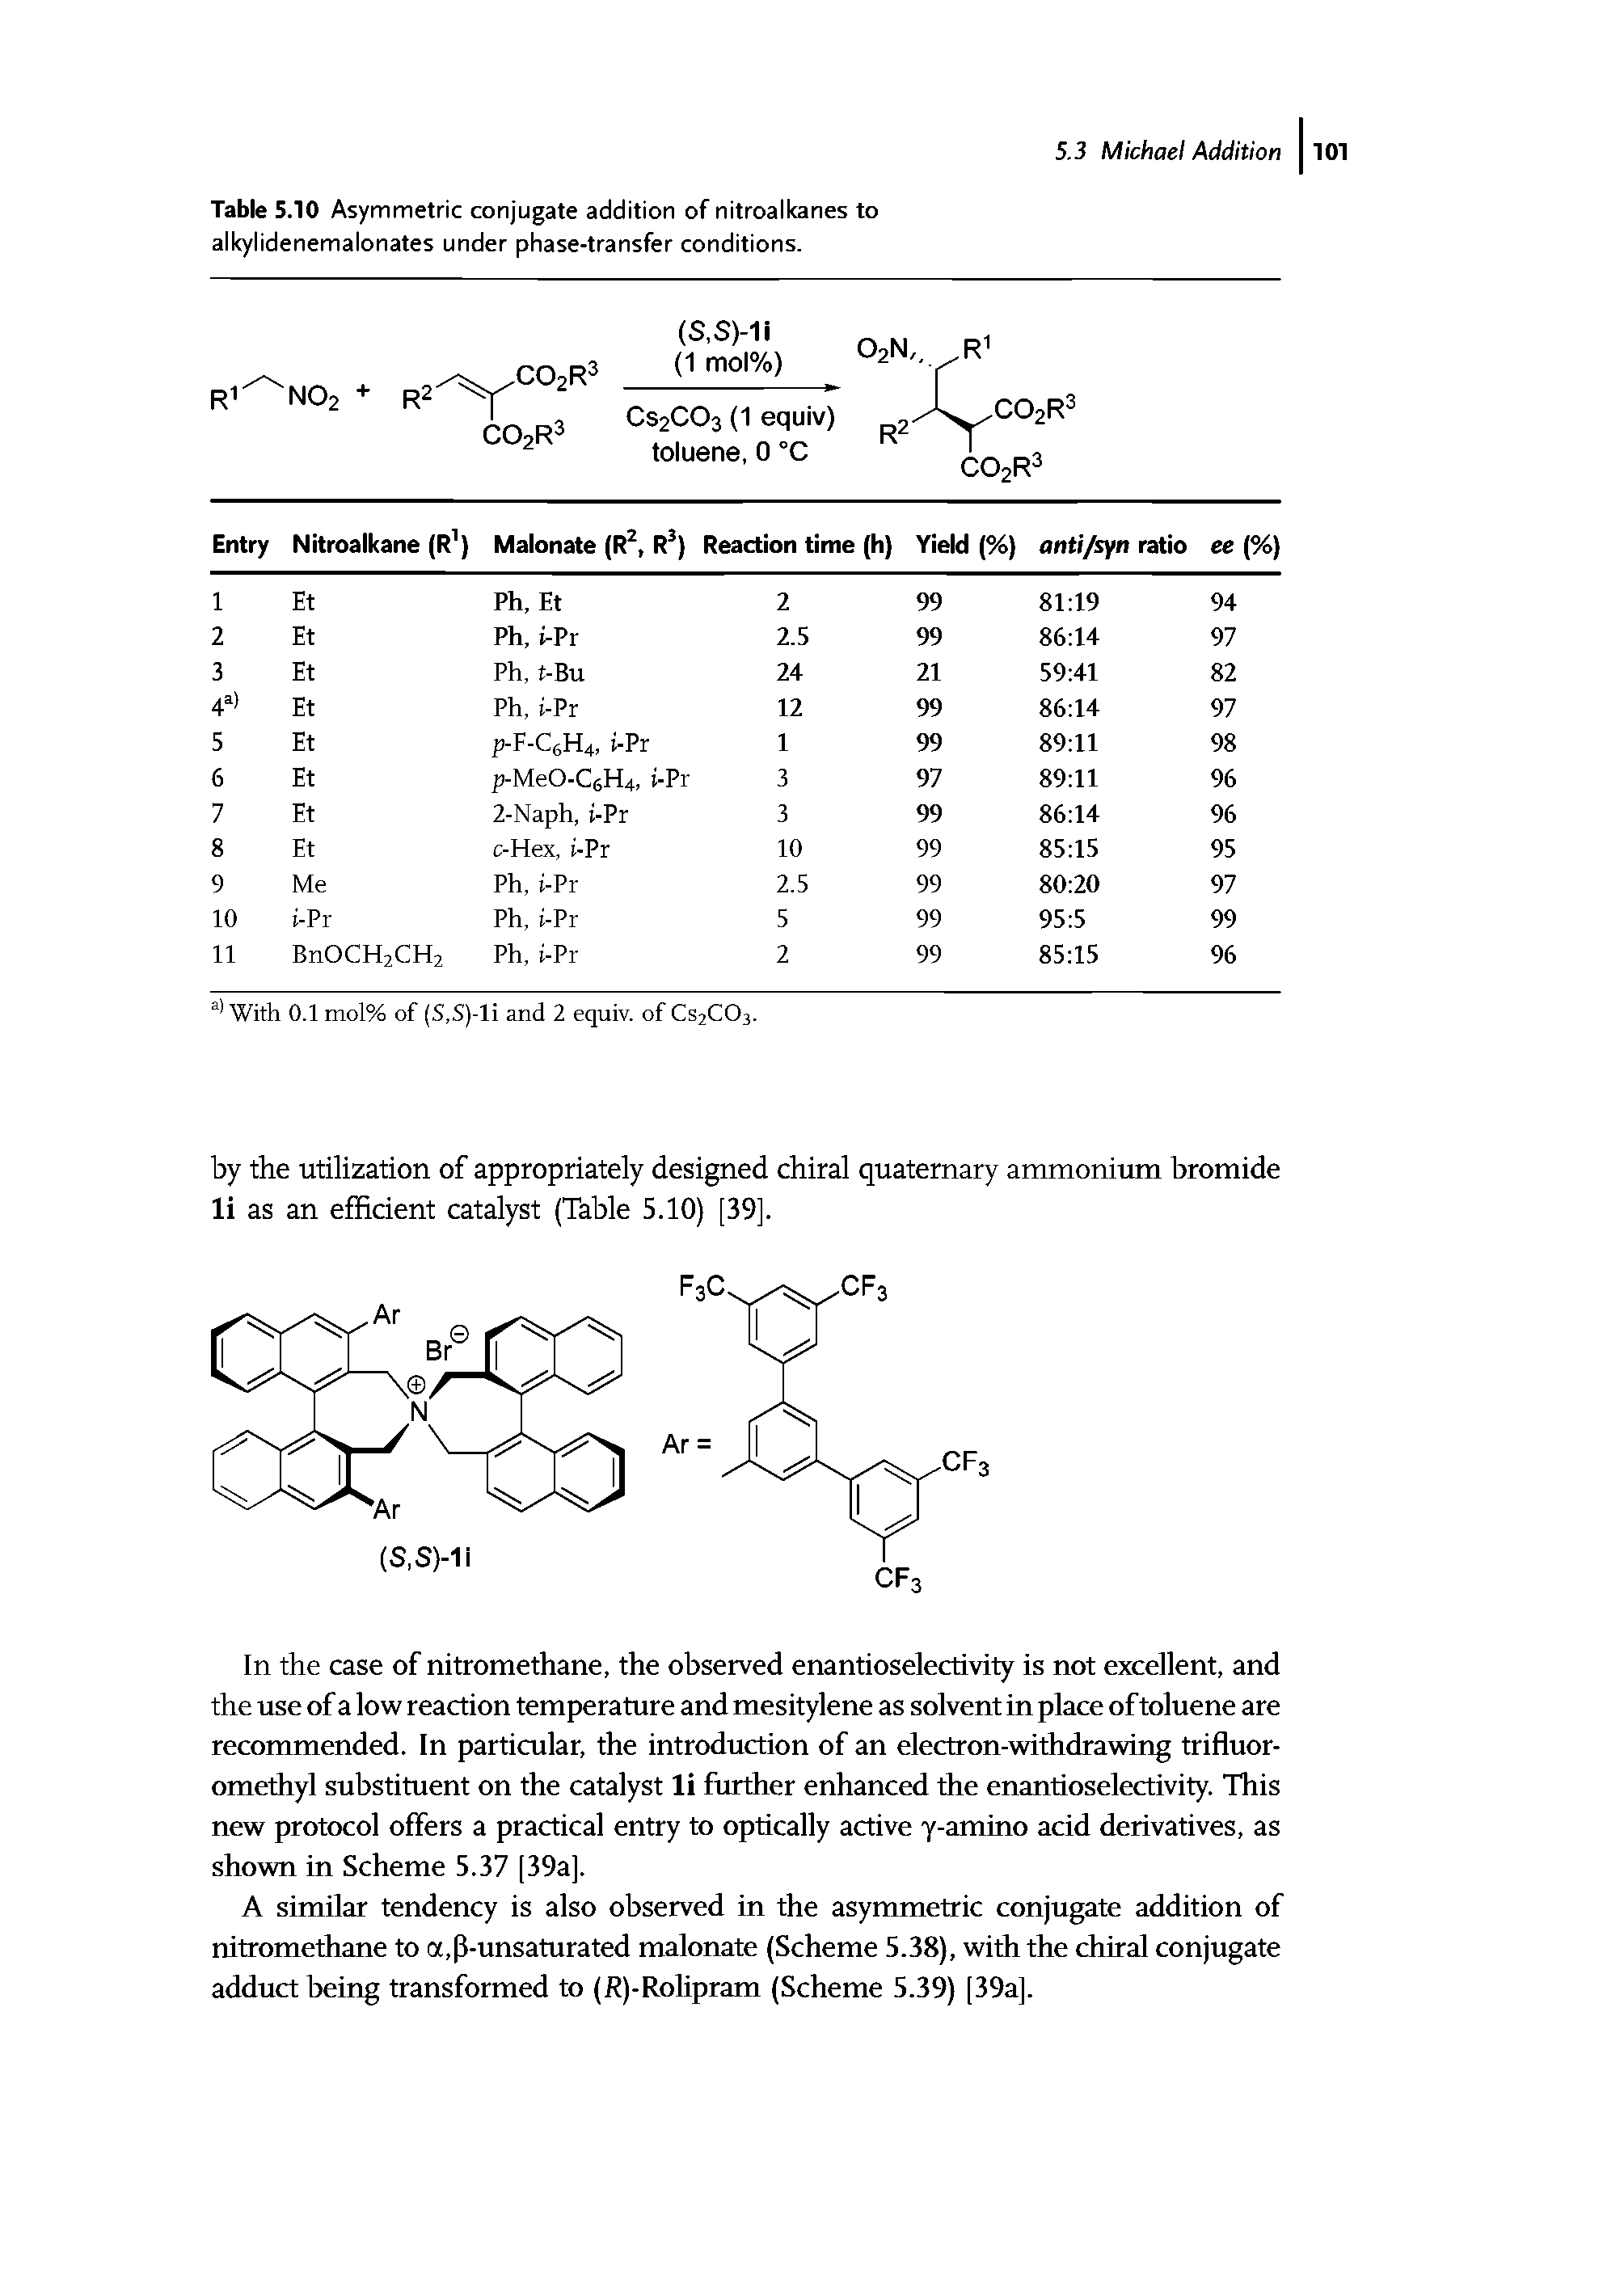 Table 5.10 Asymmetric conjugate addition of nitroalkanes to alkylidenemalonates under phase-transfer conditions.